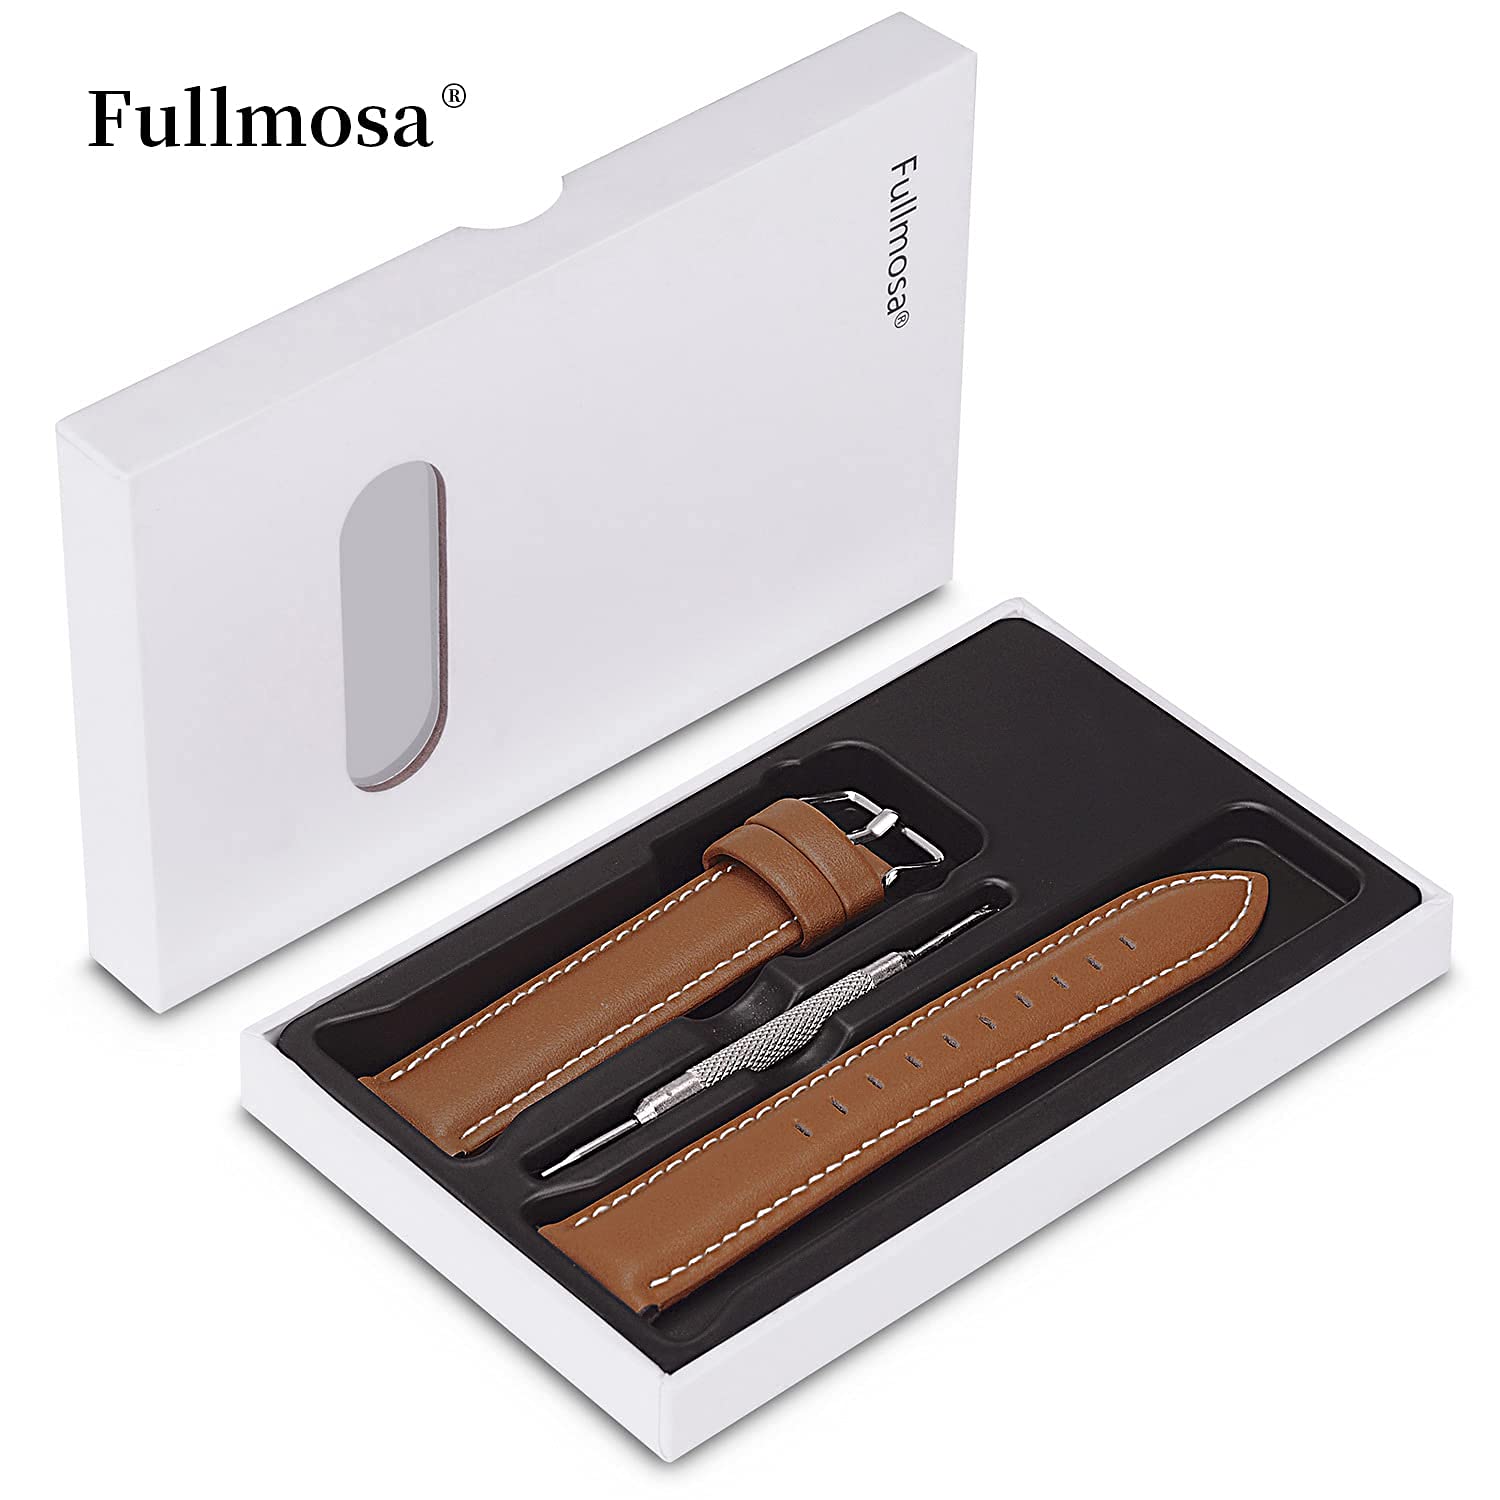 Fullmosa Genuine Leather 14mm 16mm 18mm 19mm 20mm 22mm and 24mm Watch Bands, Quick Release Watch Band for Men and Women, Fits Samsung Galaxy Watch 5/4/3,Garmin Watch,Huawei Watch